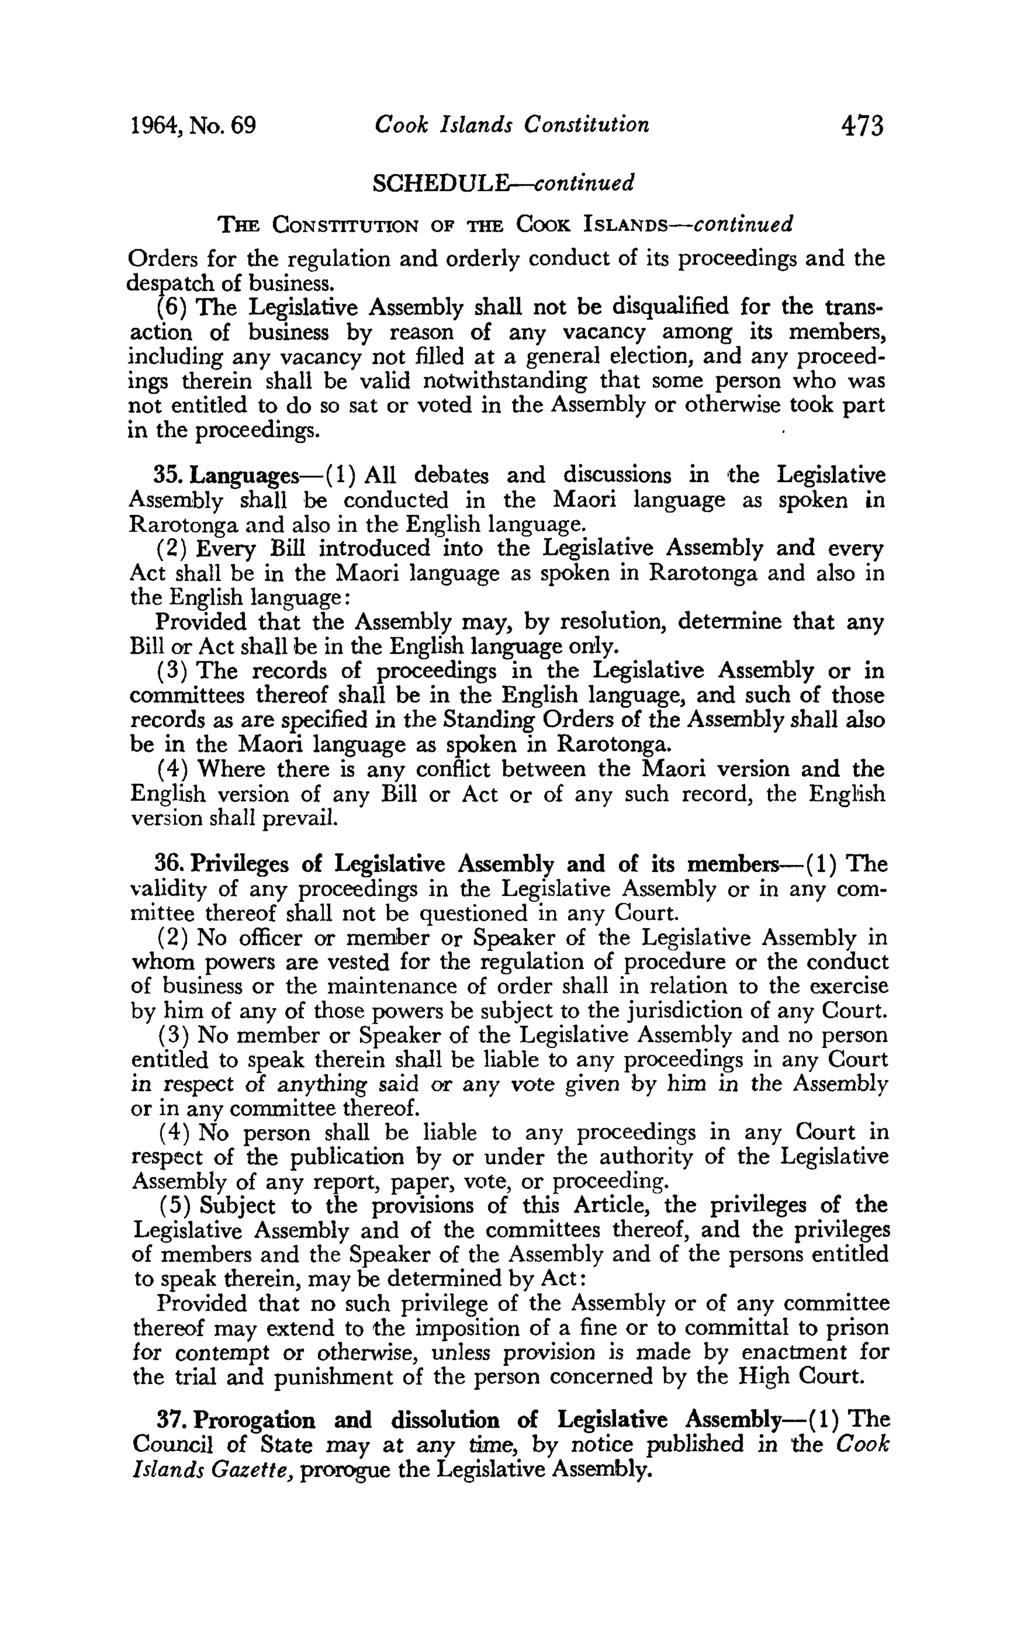 1964, No. 69 Cook Islands Constitution 473 Orders for the regulation and orderly conduct of its proceedings and the despatch of business.